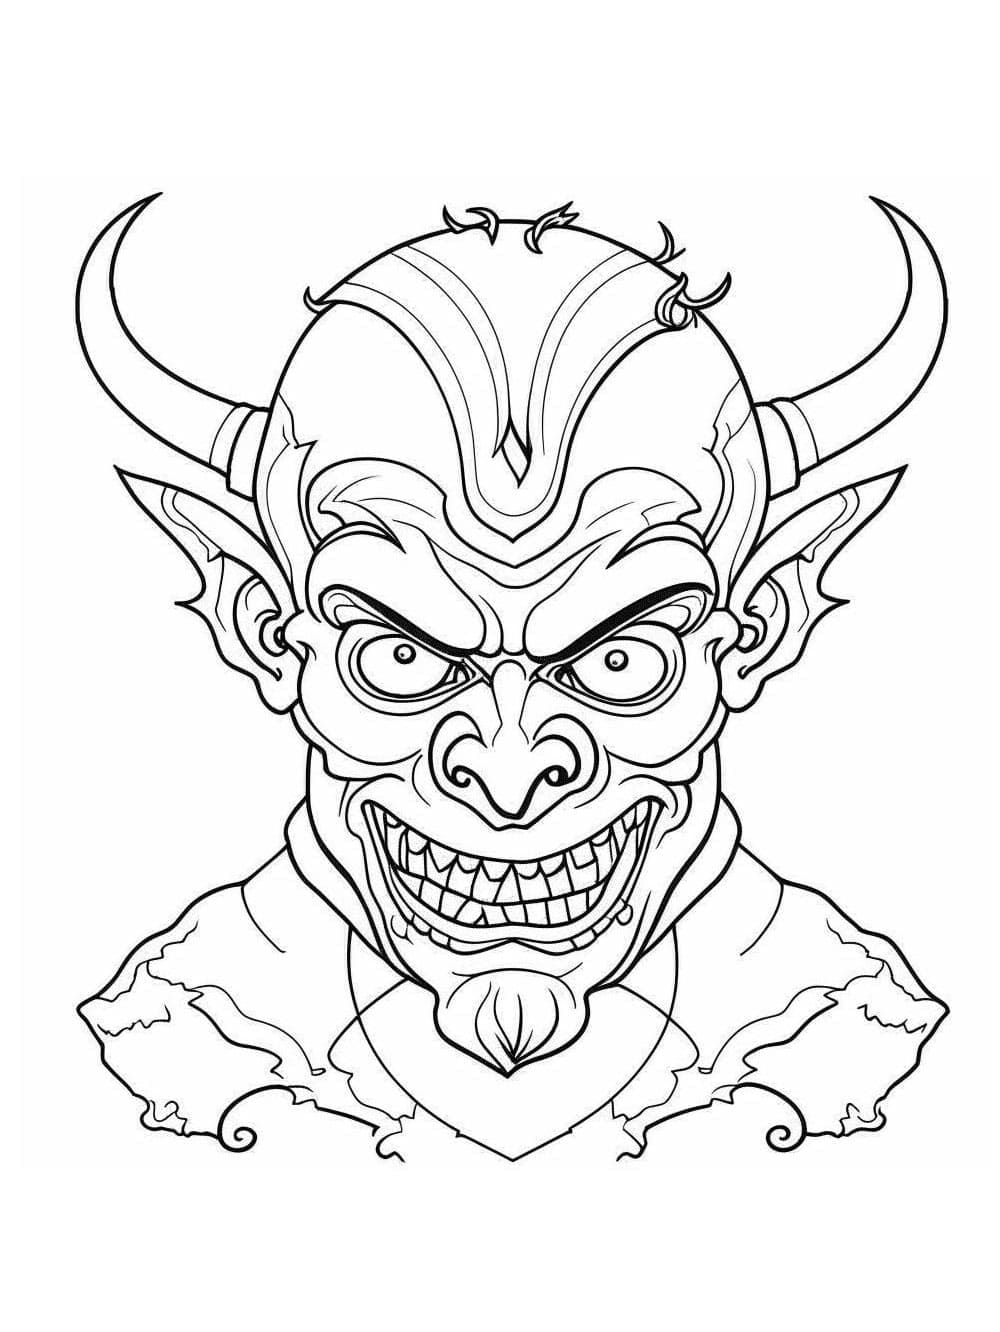 Diable Effrayant coloring page